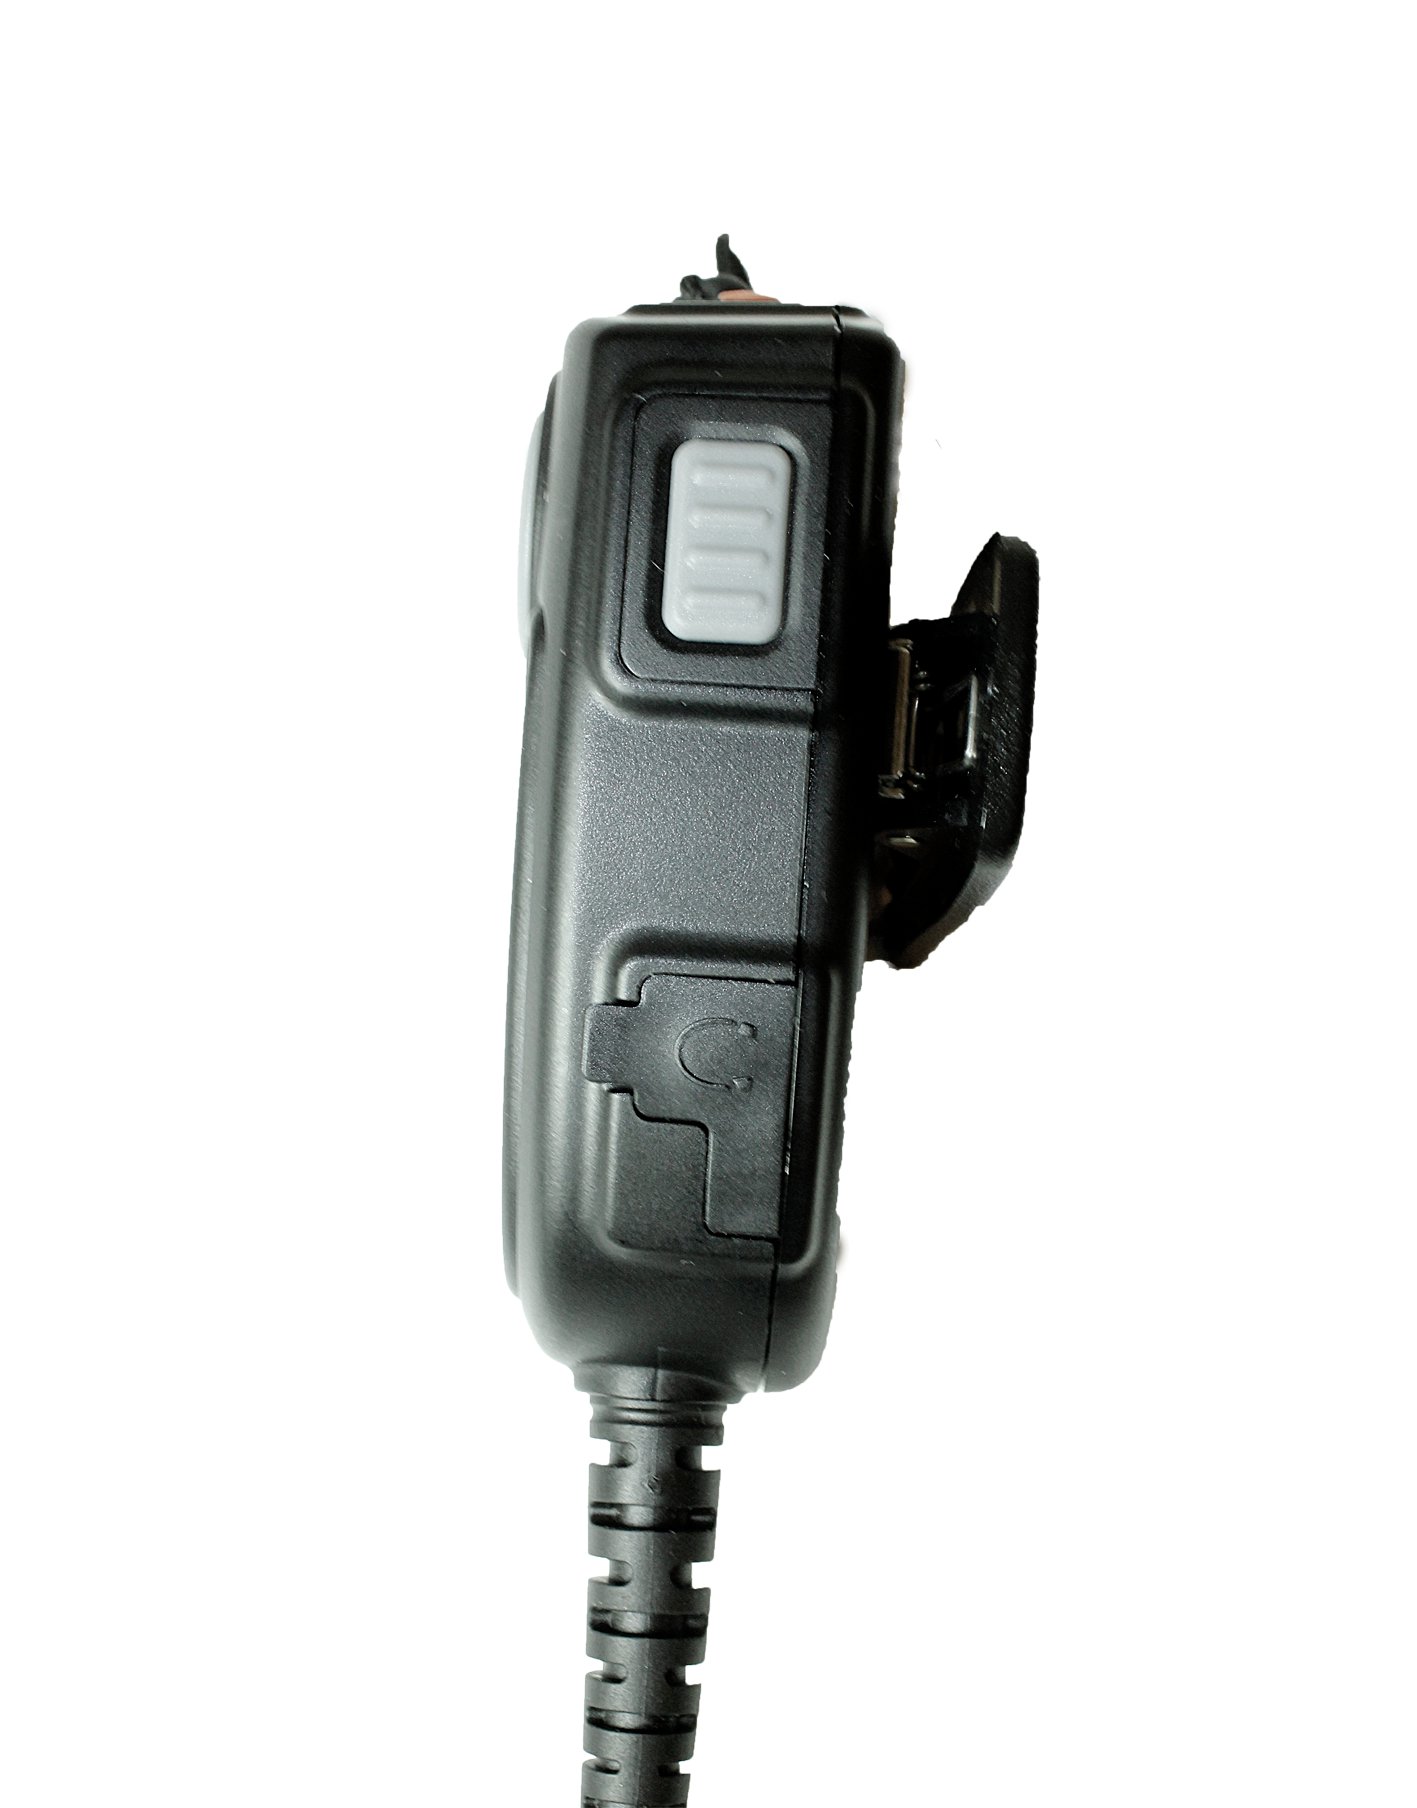 TITAN remote speaker microphone MM20 with Nexus socket 02 suitable for Hytera PD705, PD785, PT580